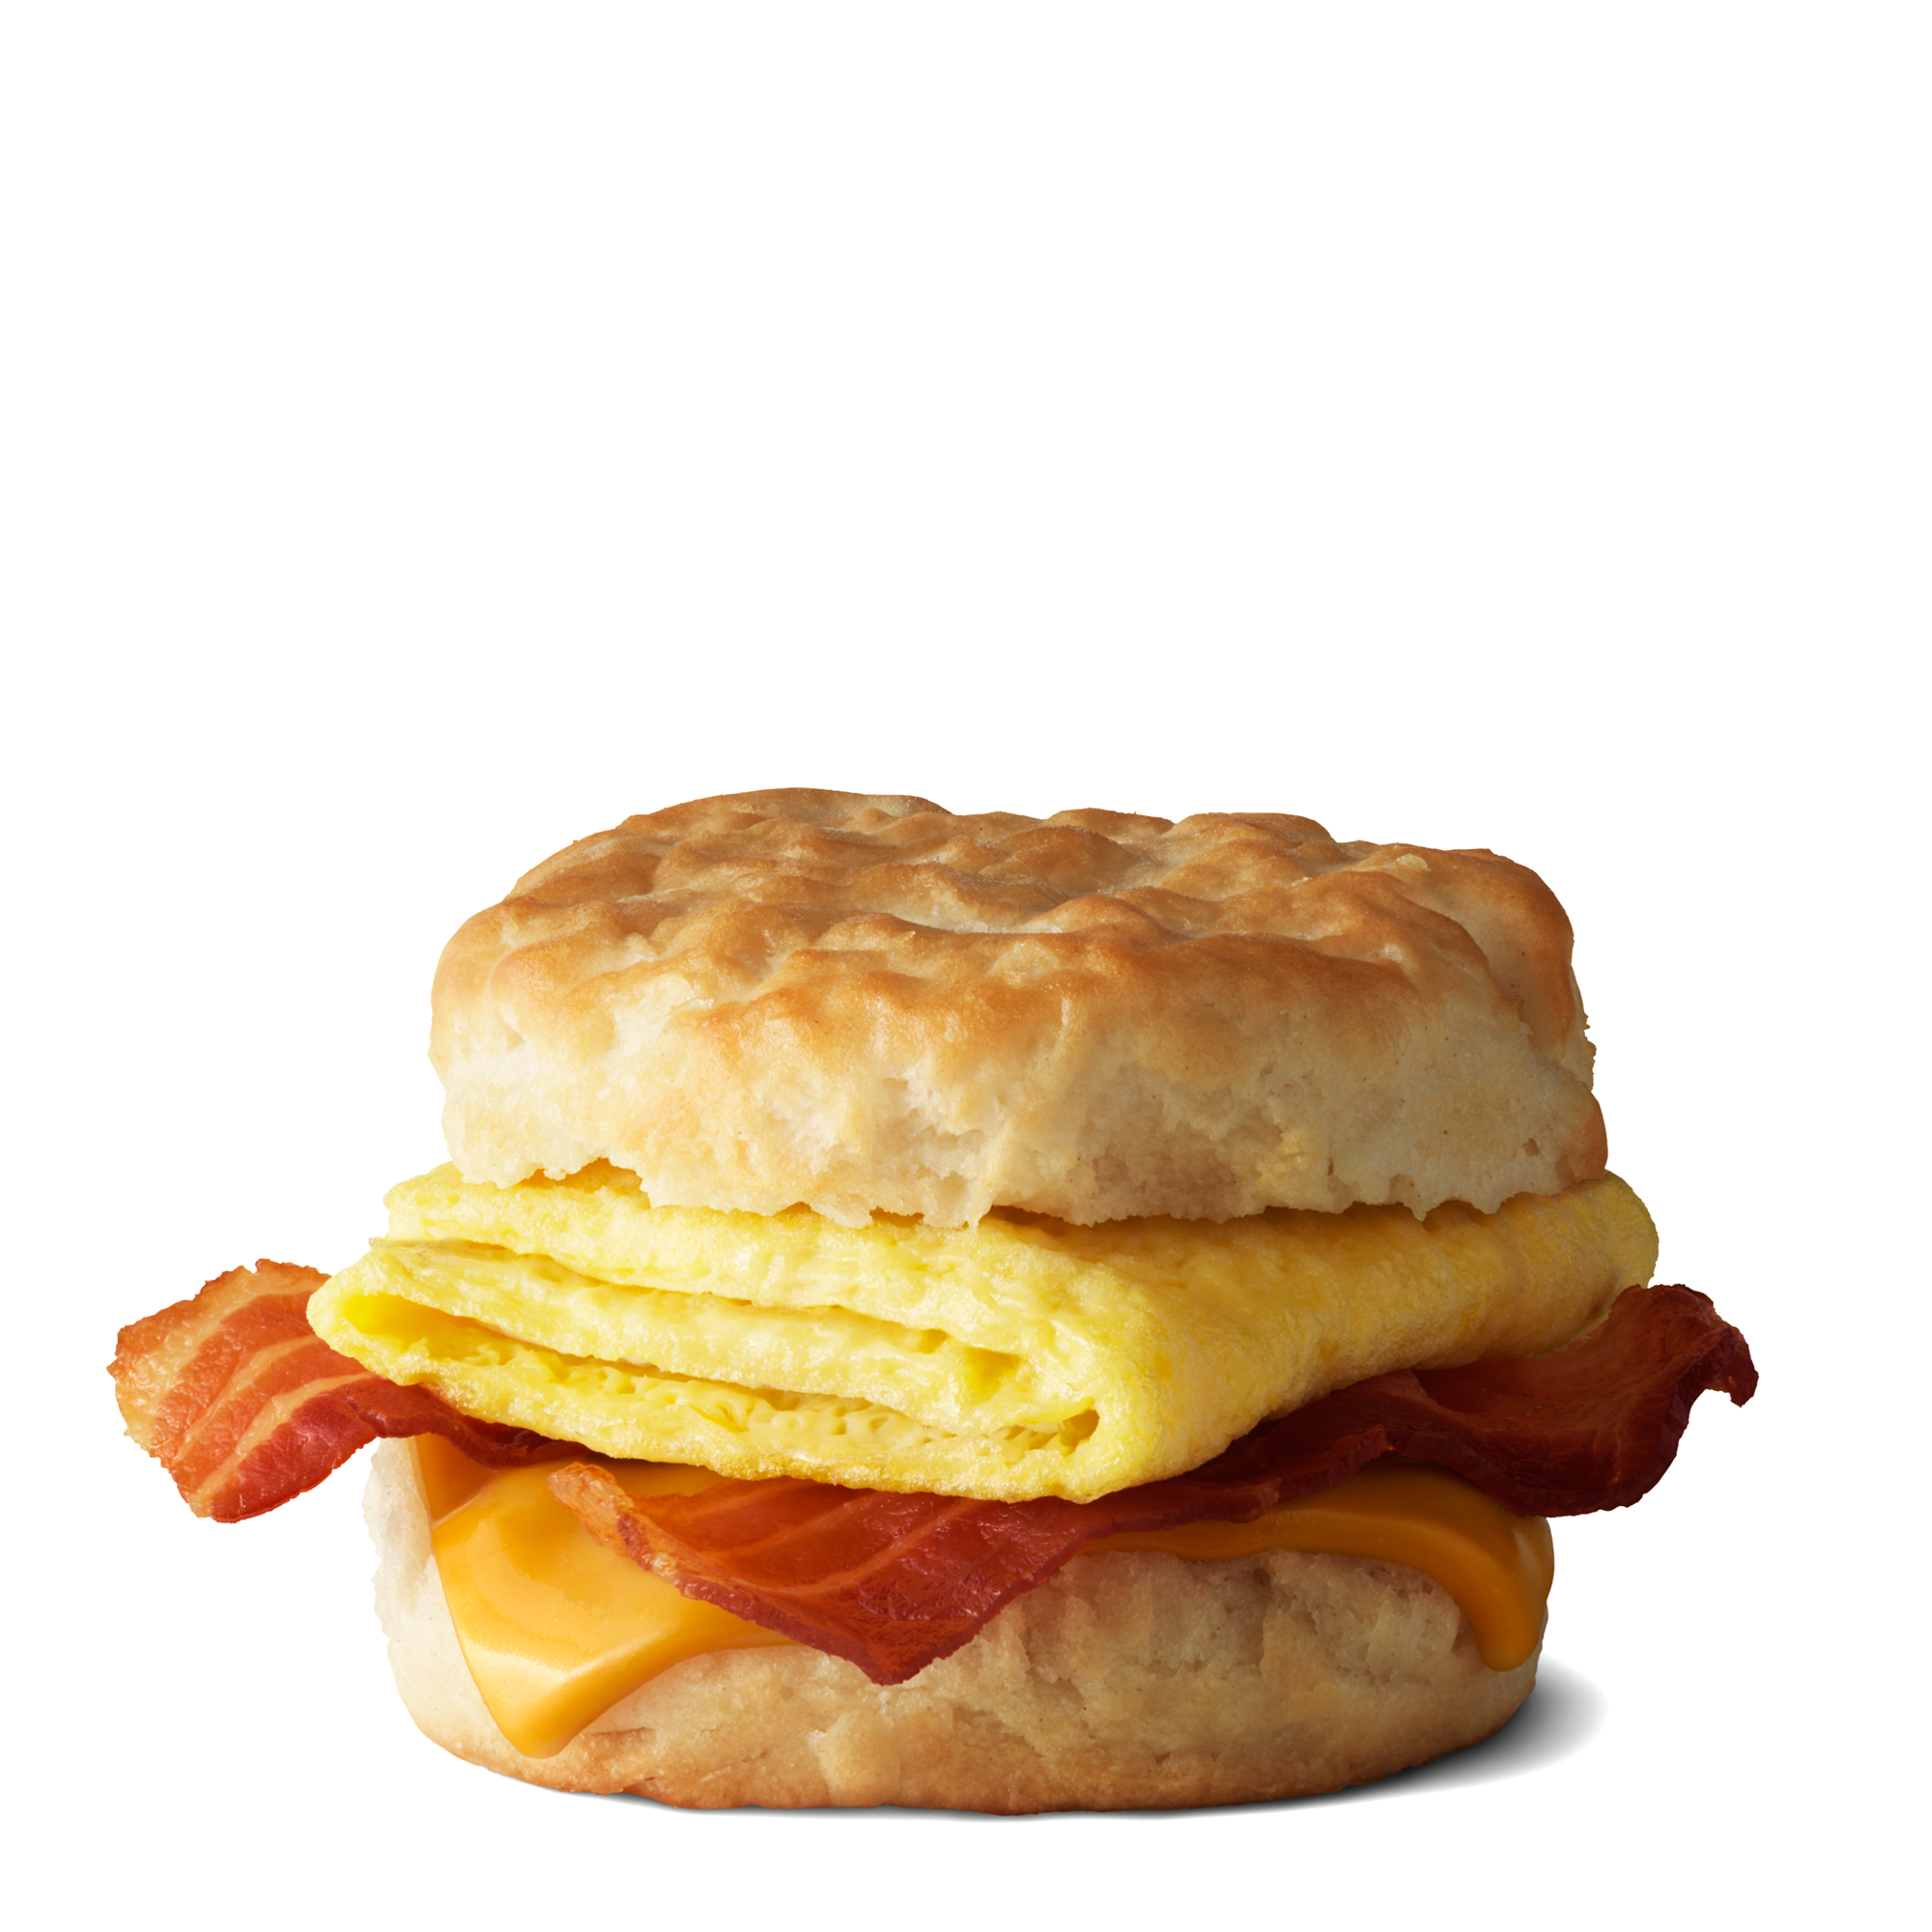 Bacon Egg and Cheese Biscuit